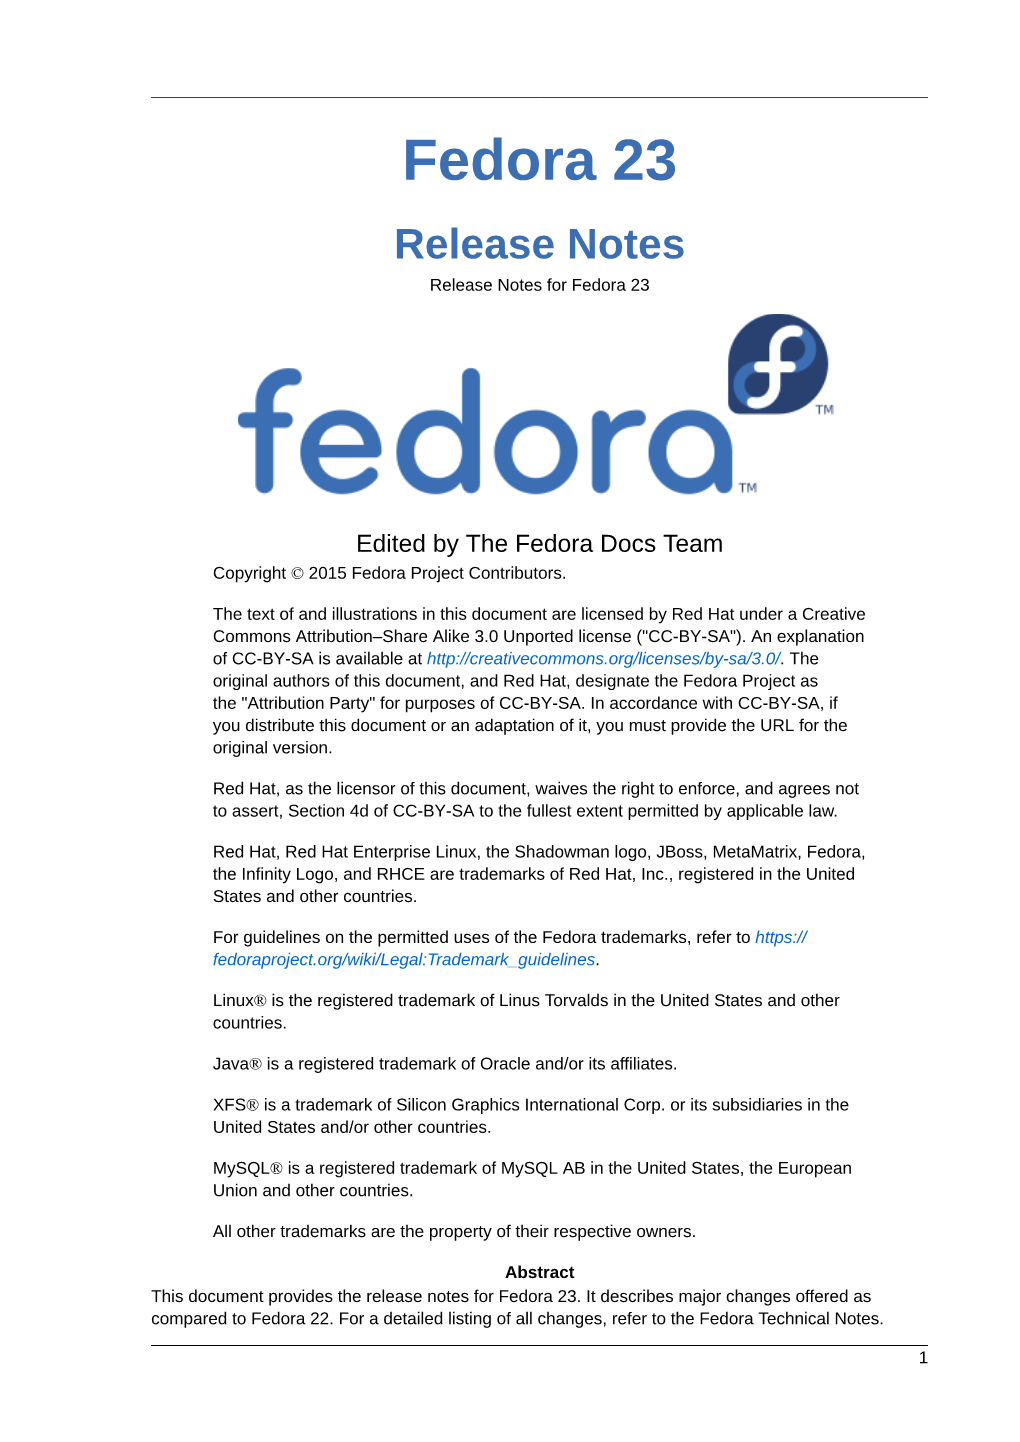 Release Notes for Fedora 23